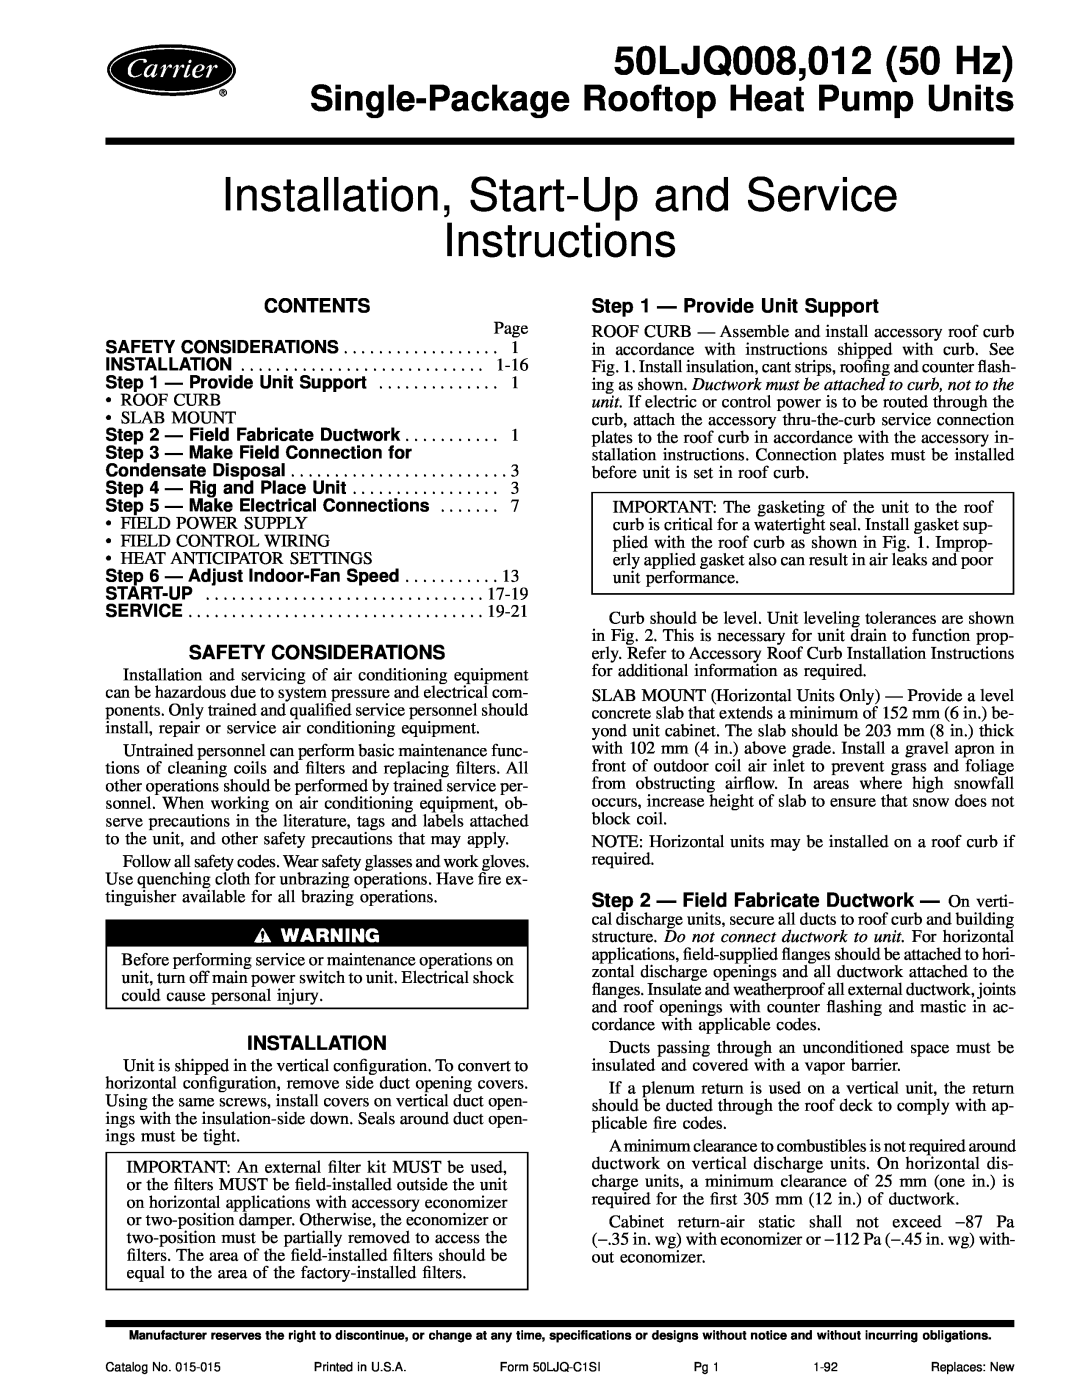 Carrier 012, 50LJQ008 installation instructions Contents, Safety Considerations, Installation, Ð Provide Unit Support 